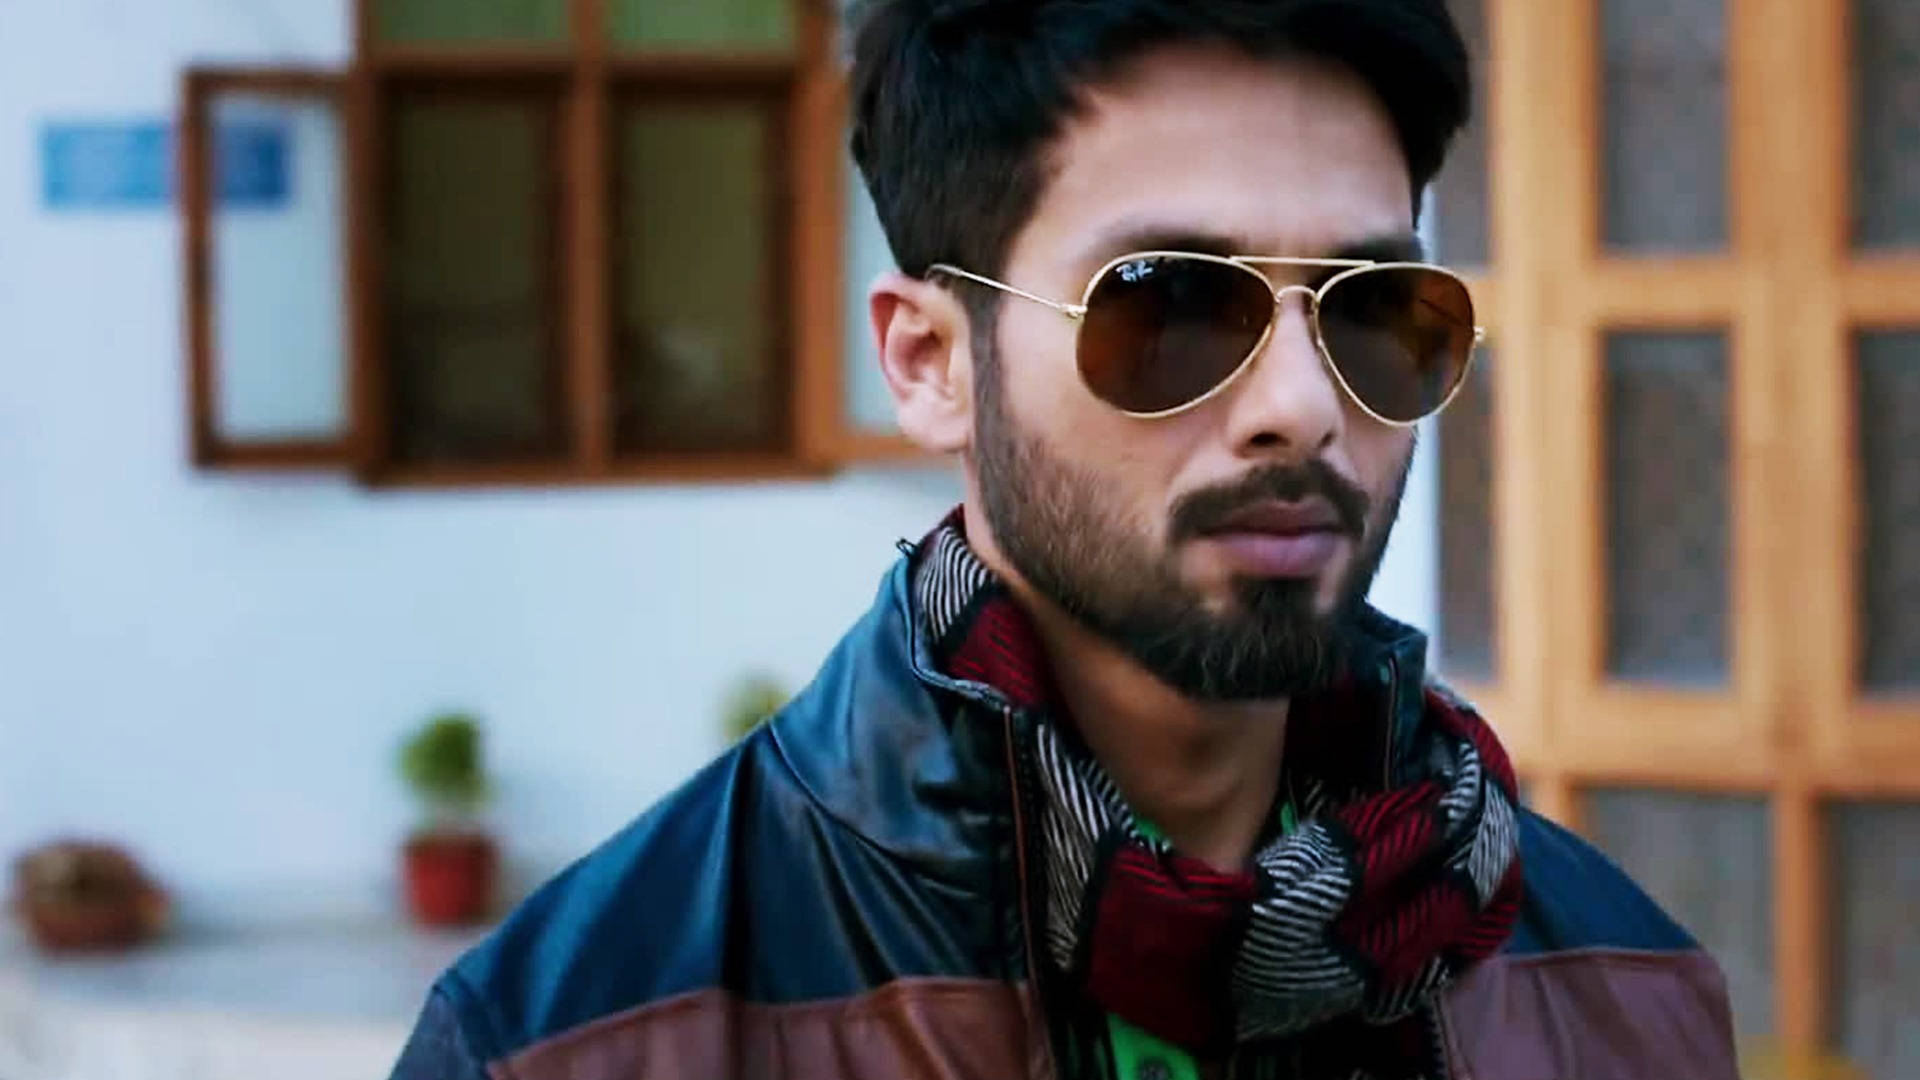 Serious Shahid Kapoor Wearing Glasses Background